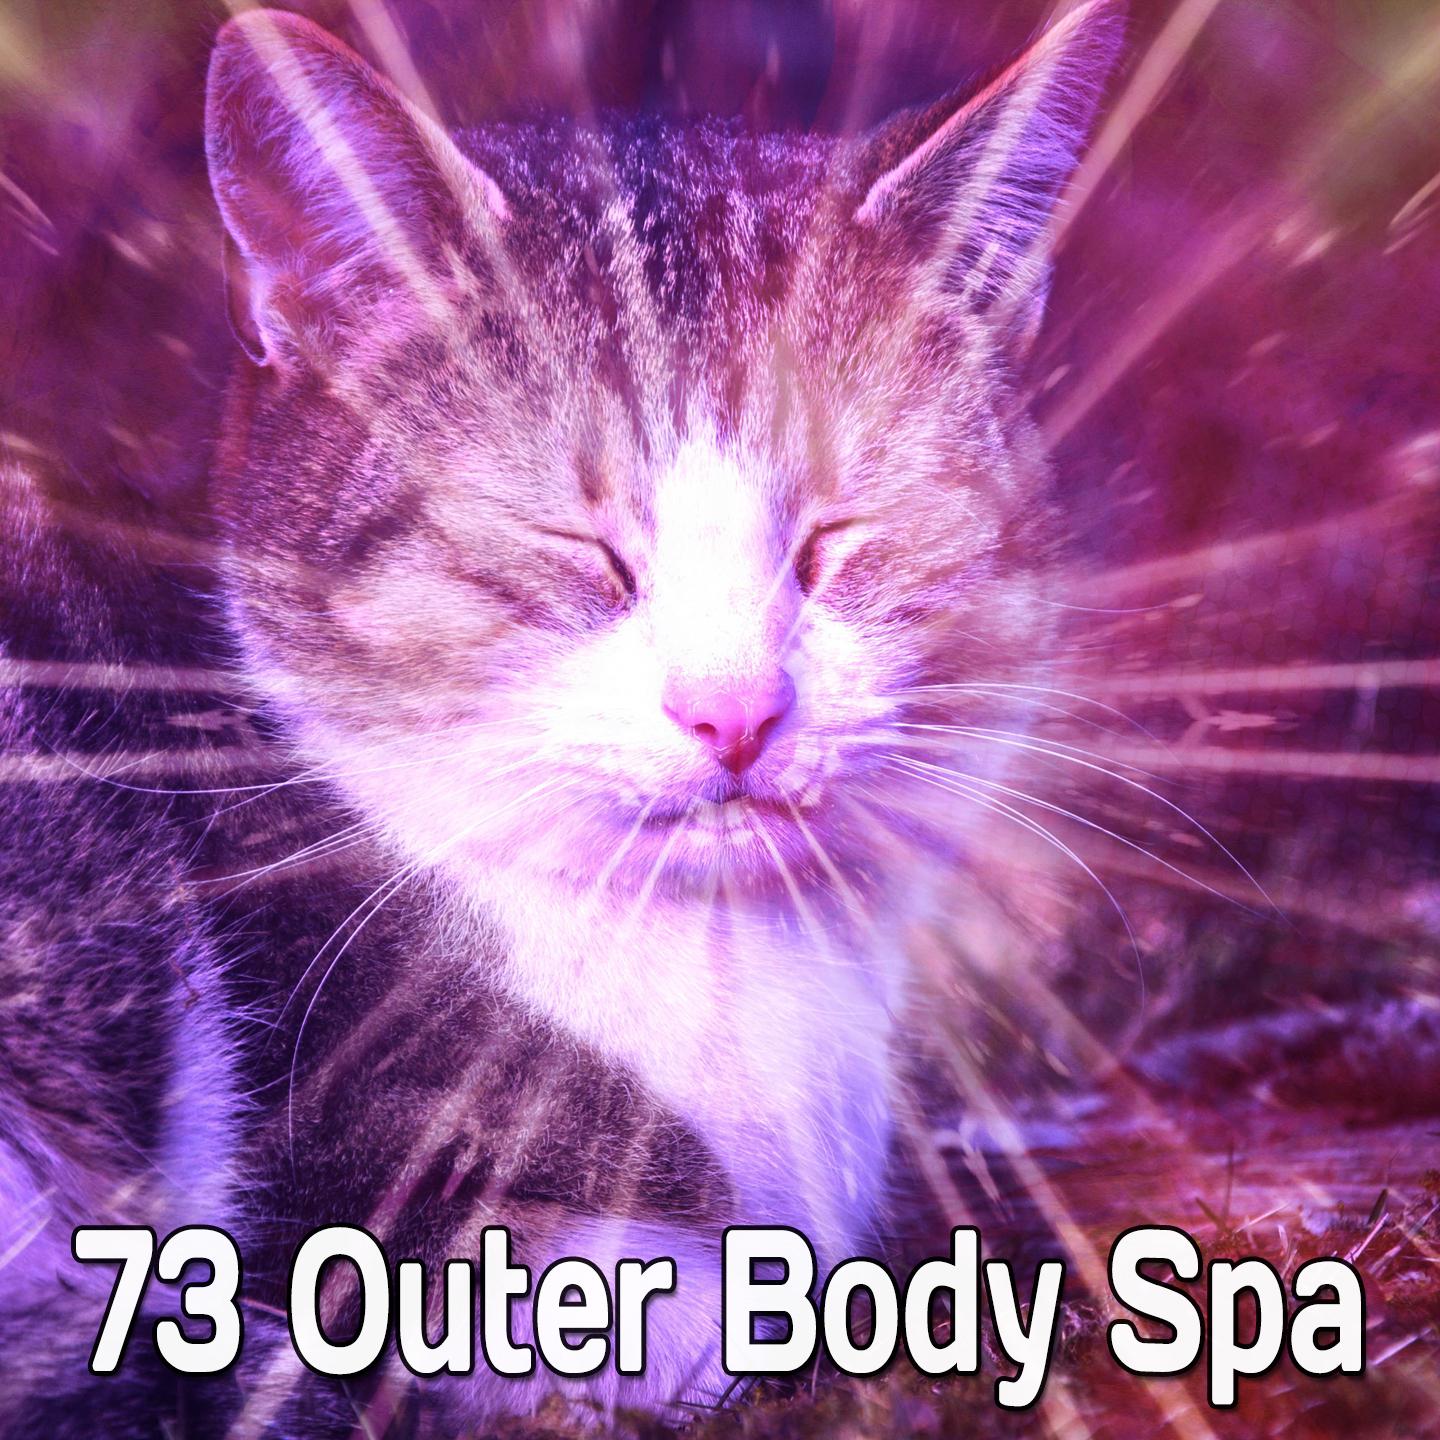 73 Outer Body Spa